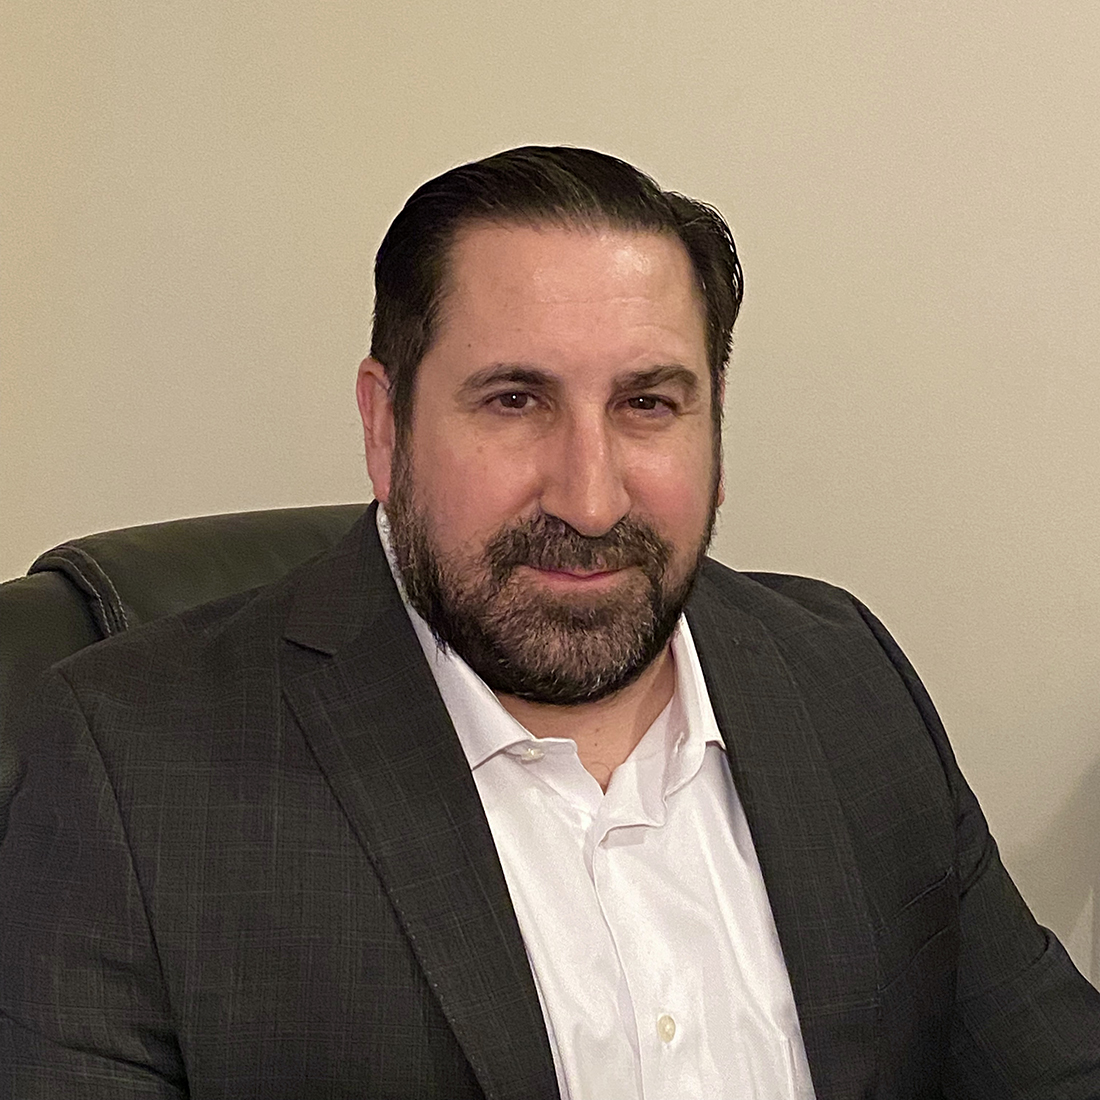 ASW Welcomes Paul Nonno VP GM, Supply Chain Services